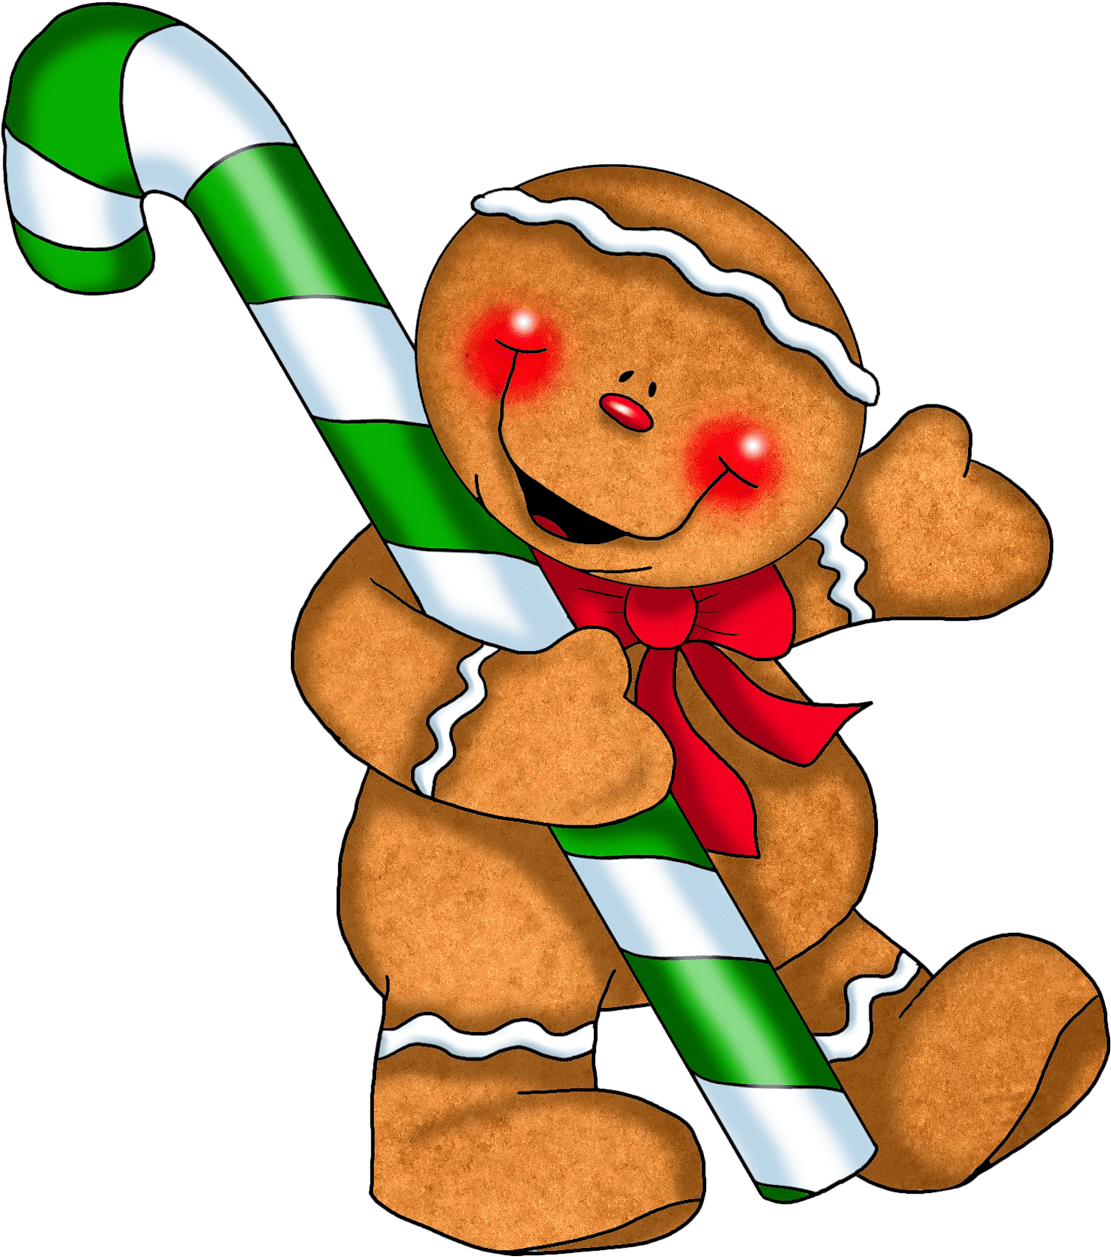 Pin Christmas Candy Cane Border Clip Art - Gingerbread Man Holding A Candy Cane (1147x1280)